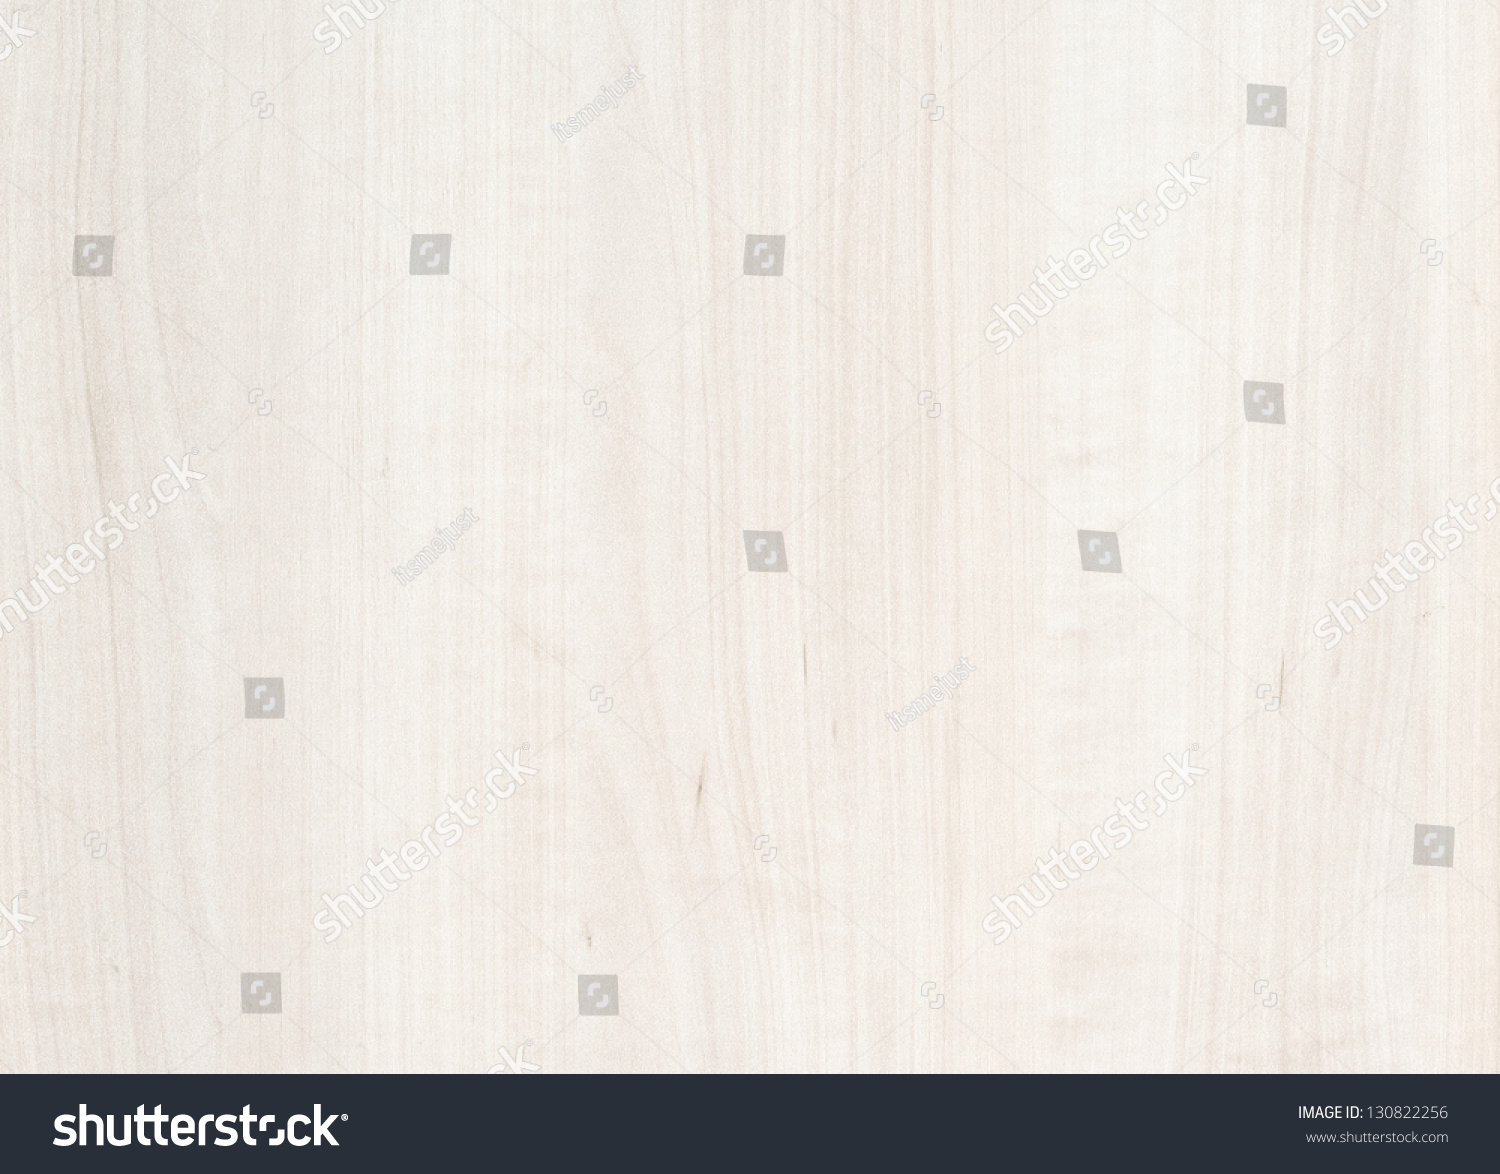 White wooden background. Very big size. #130822256